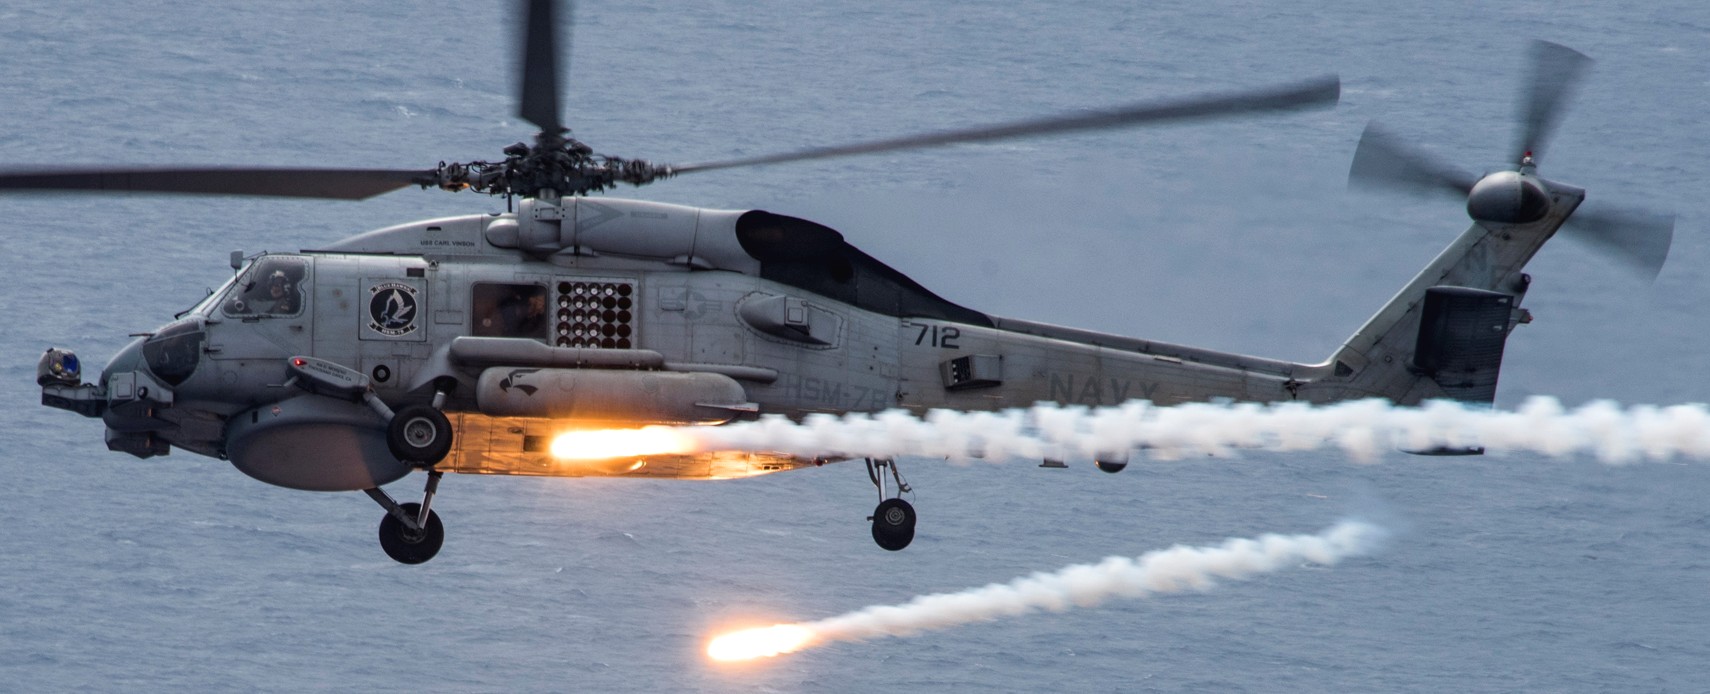 hsm-78 blue hawks helicopter maritime strike squadron mh-60r seahawk us navy 2017 07 flares decoys